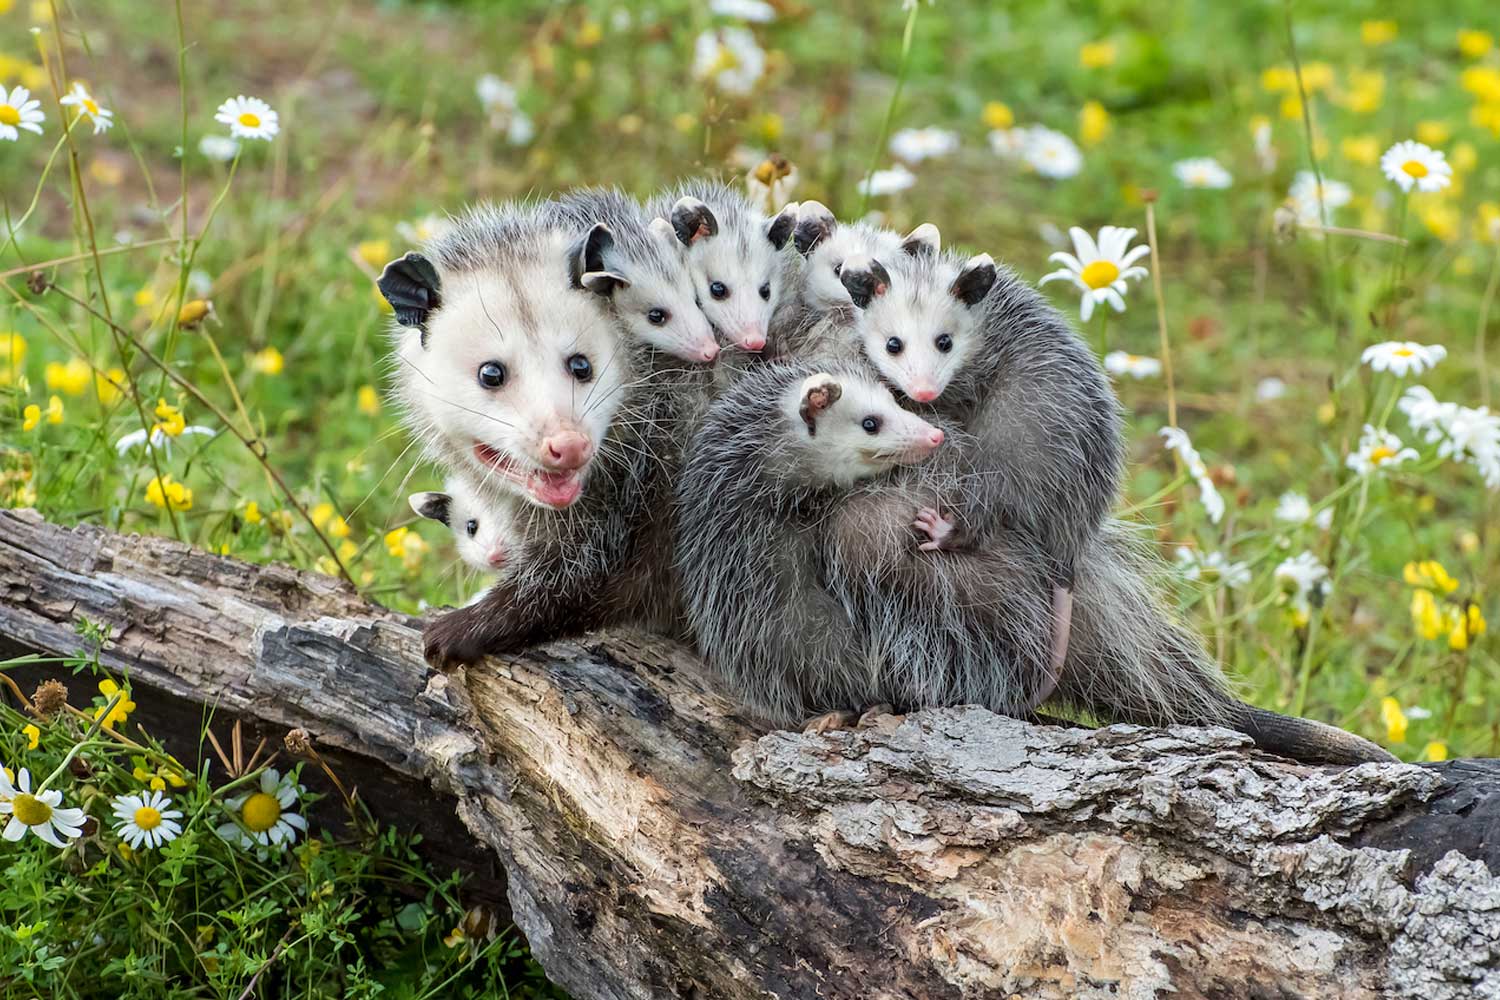 Opossum standing on a branch with babies.